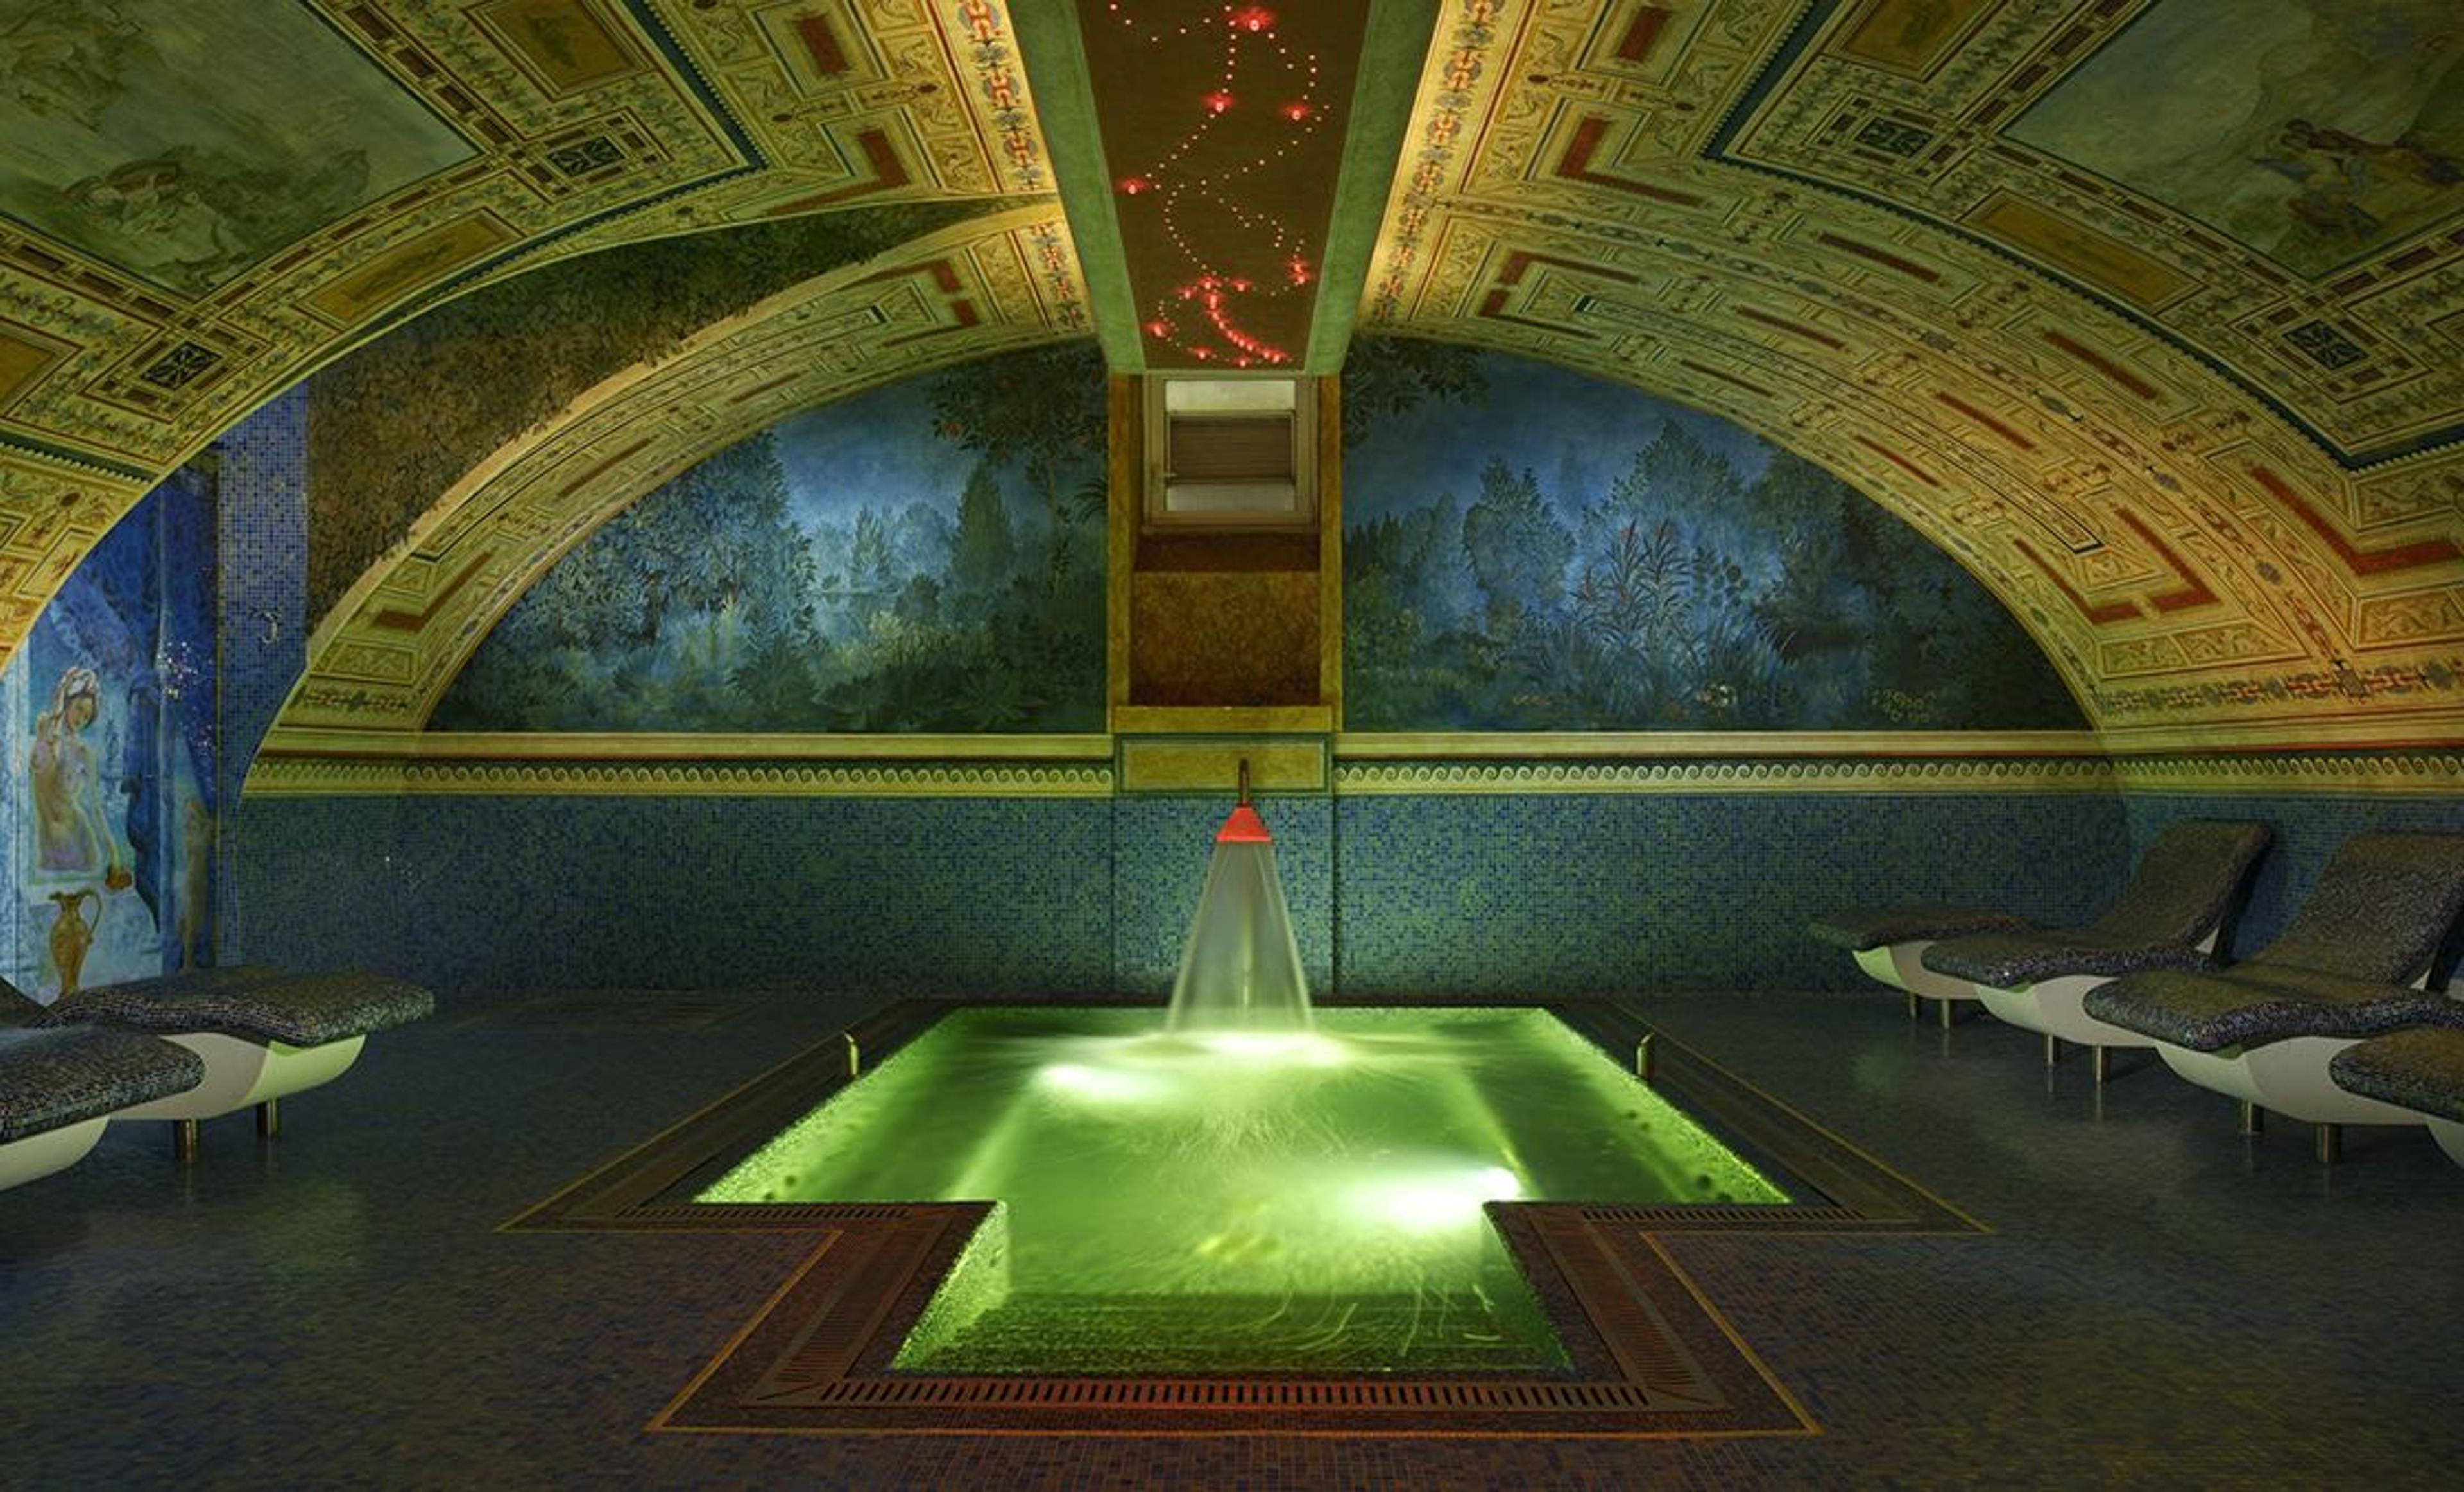 The indoor Pool of the Byblos Art Hotel.